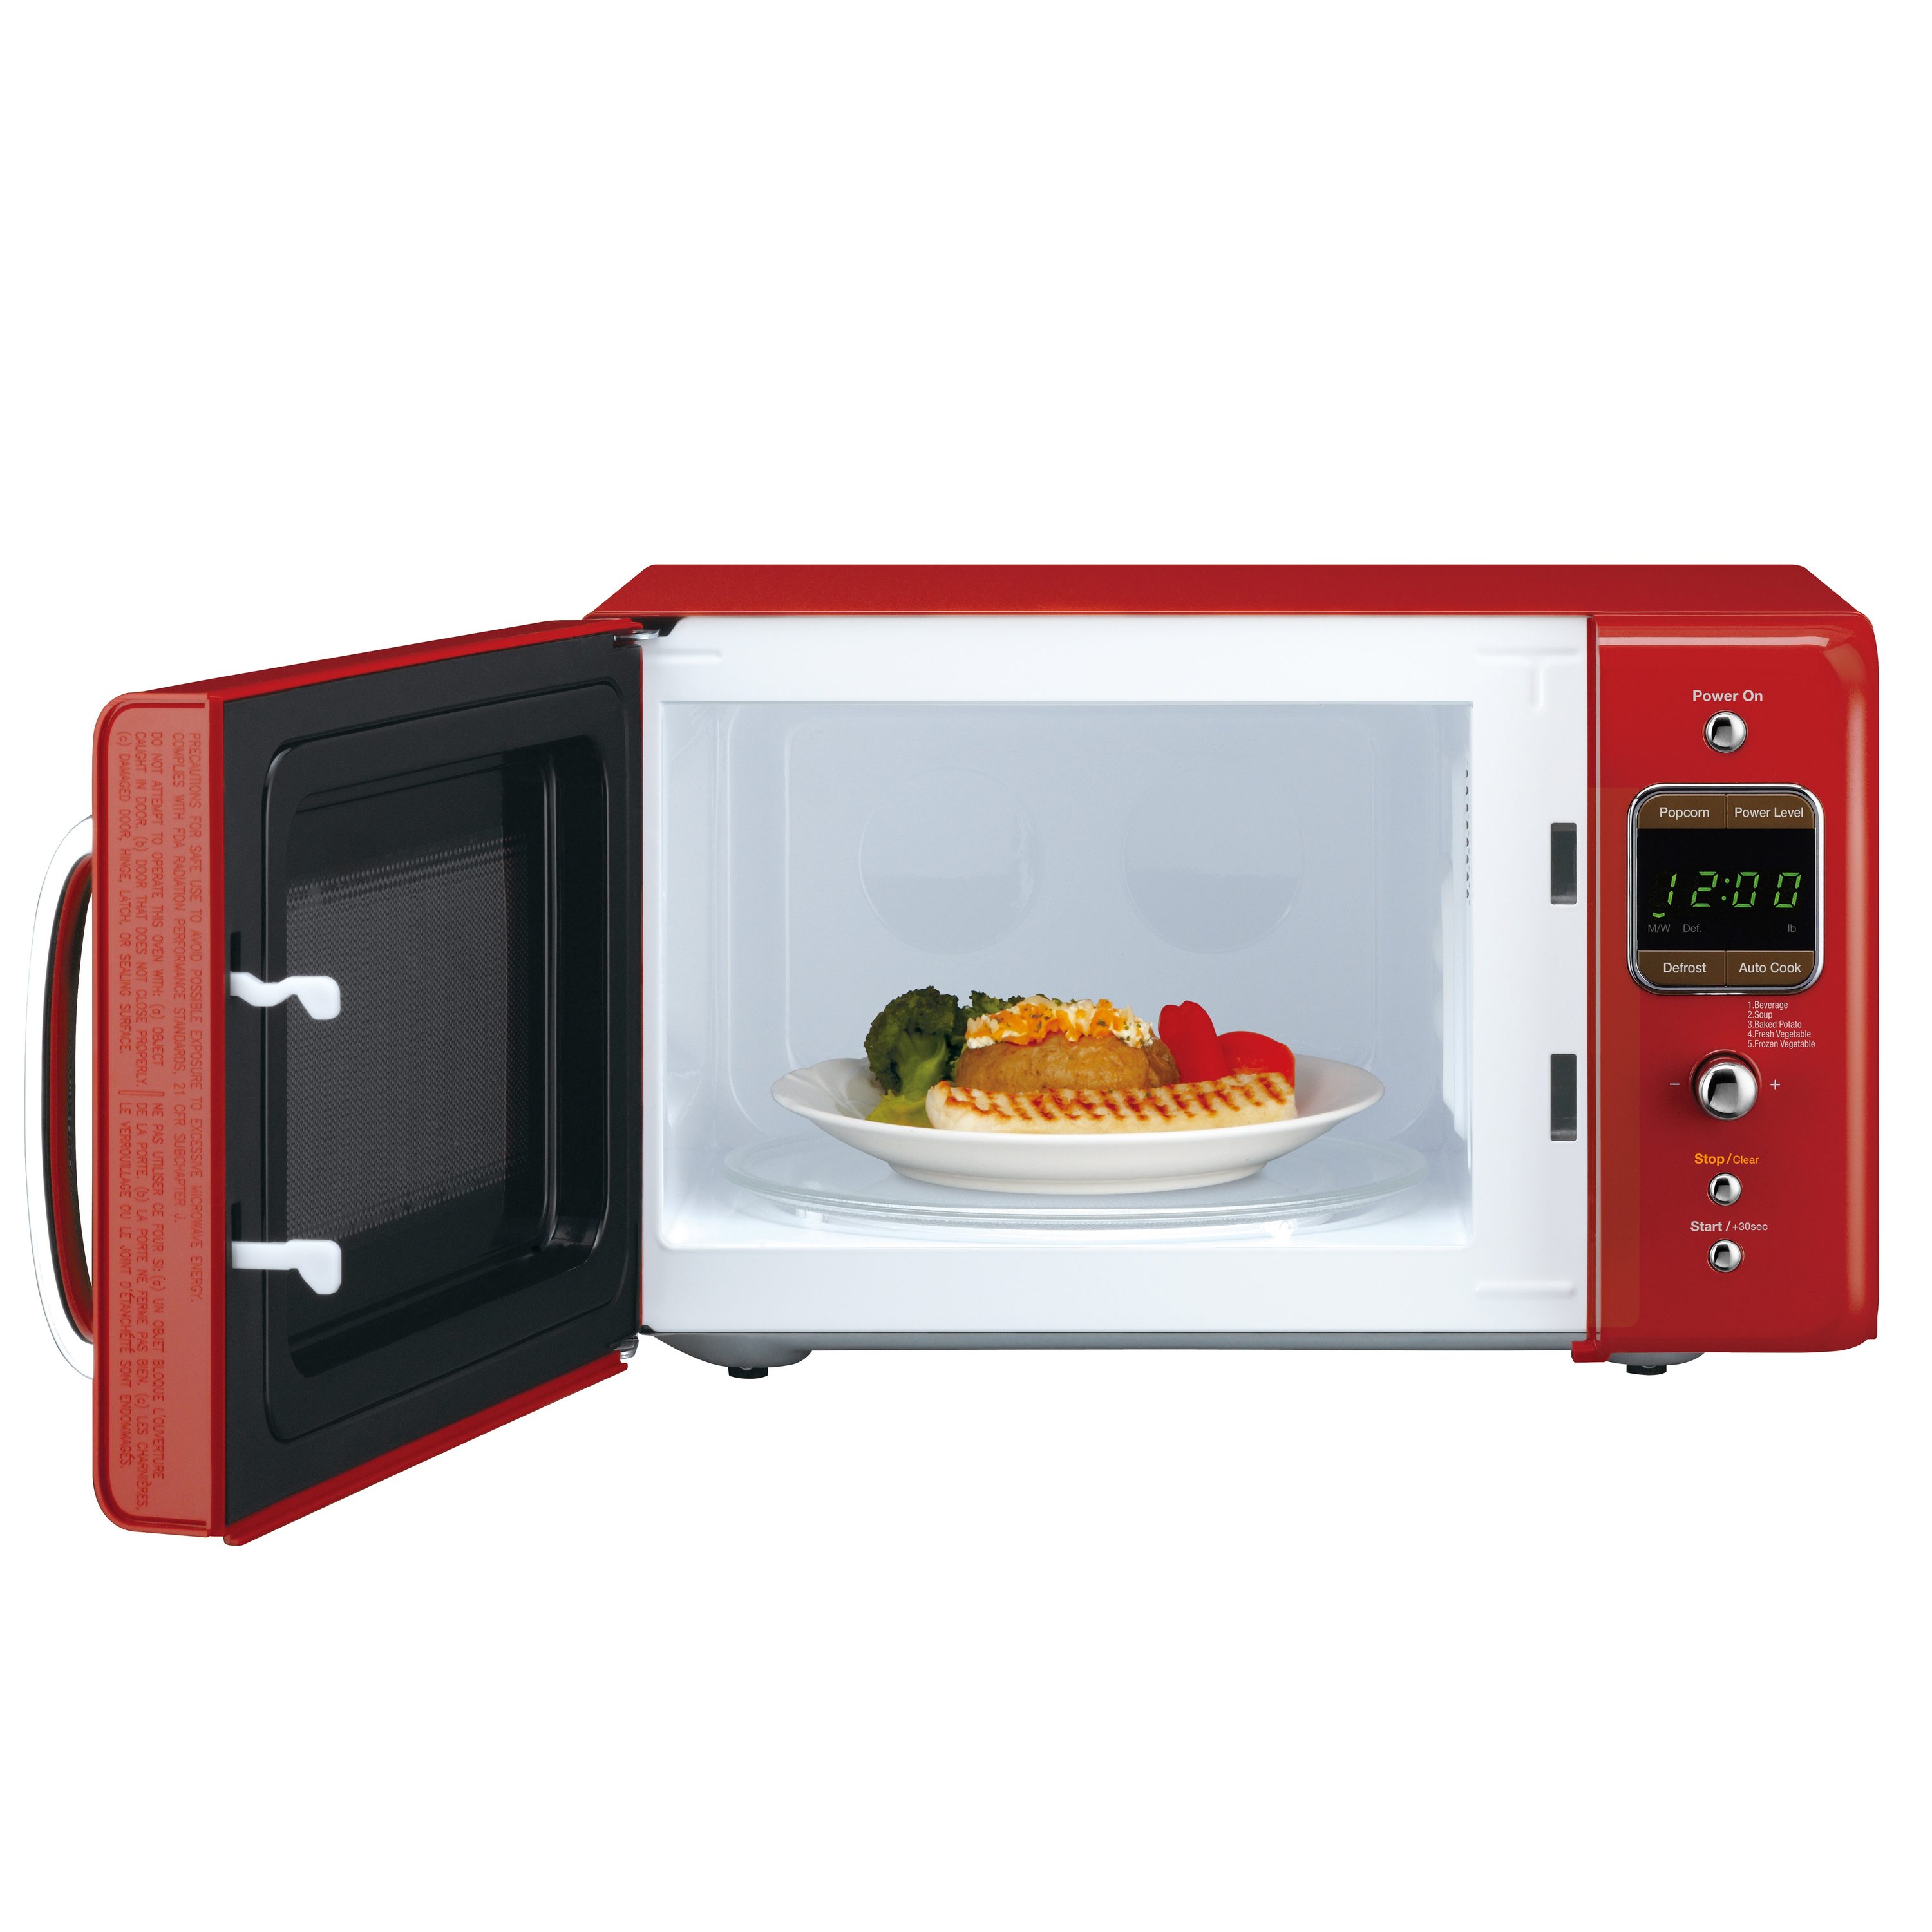 Kitcheniva Countertop Microwave Oven 700w Red, 1 Pcs - Pick 'n Save